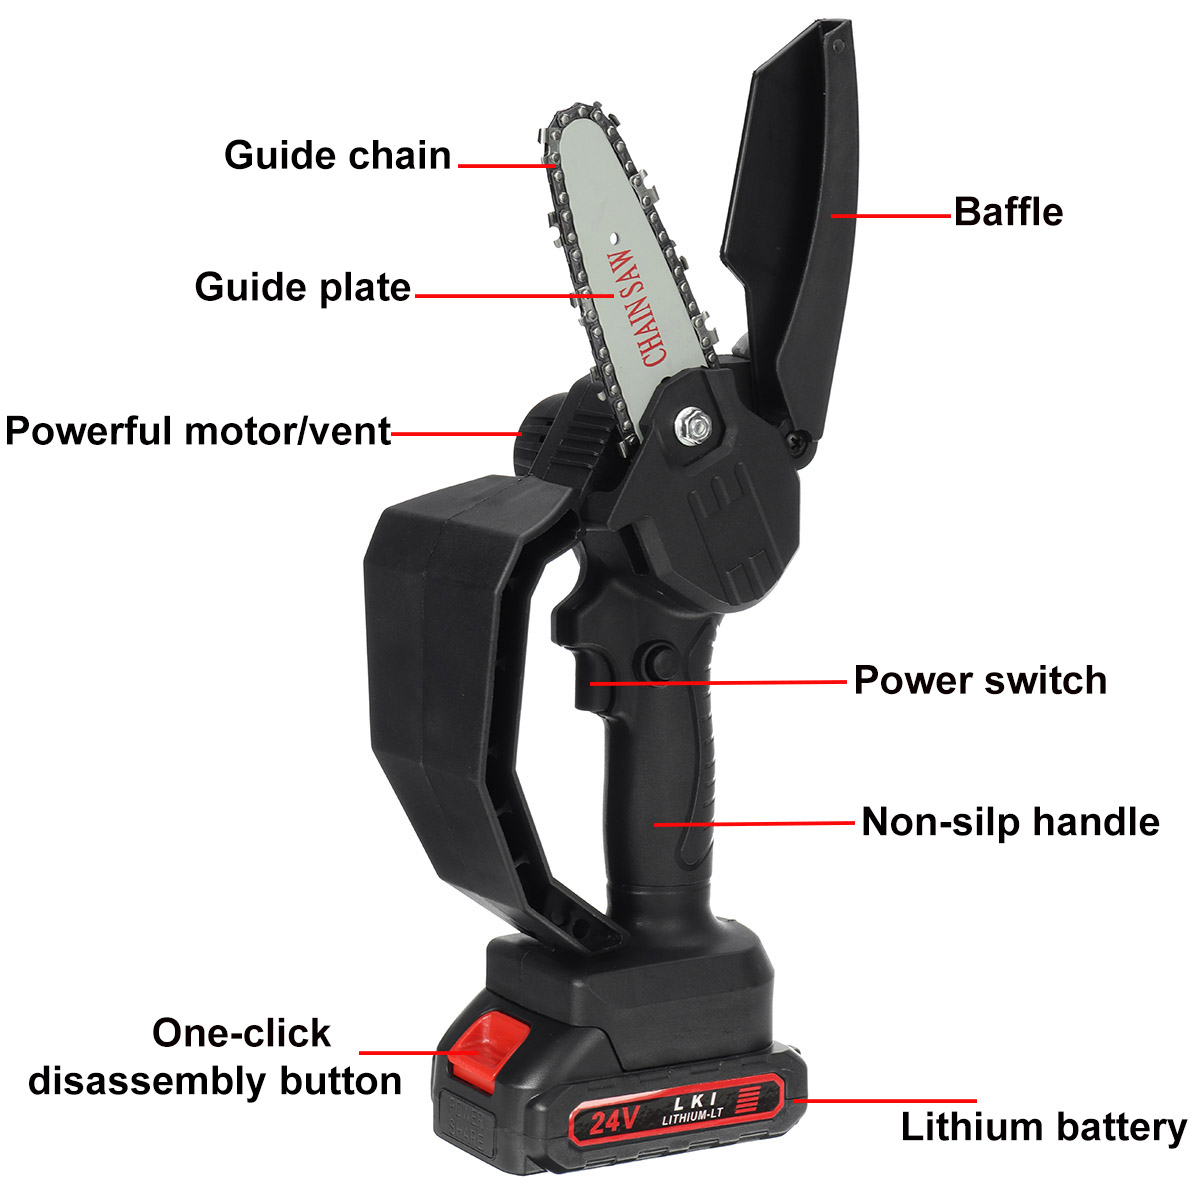 4inch-24V-Cordless-Electric-One-Hand-Saw-Chain-Saw-Woodworking-Tool-W-12-Battery-Kit-1857524-5